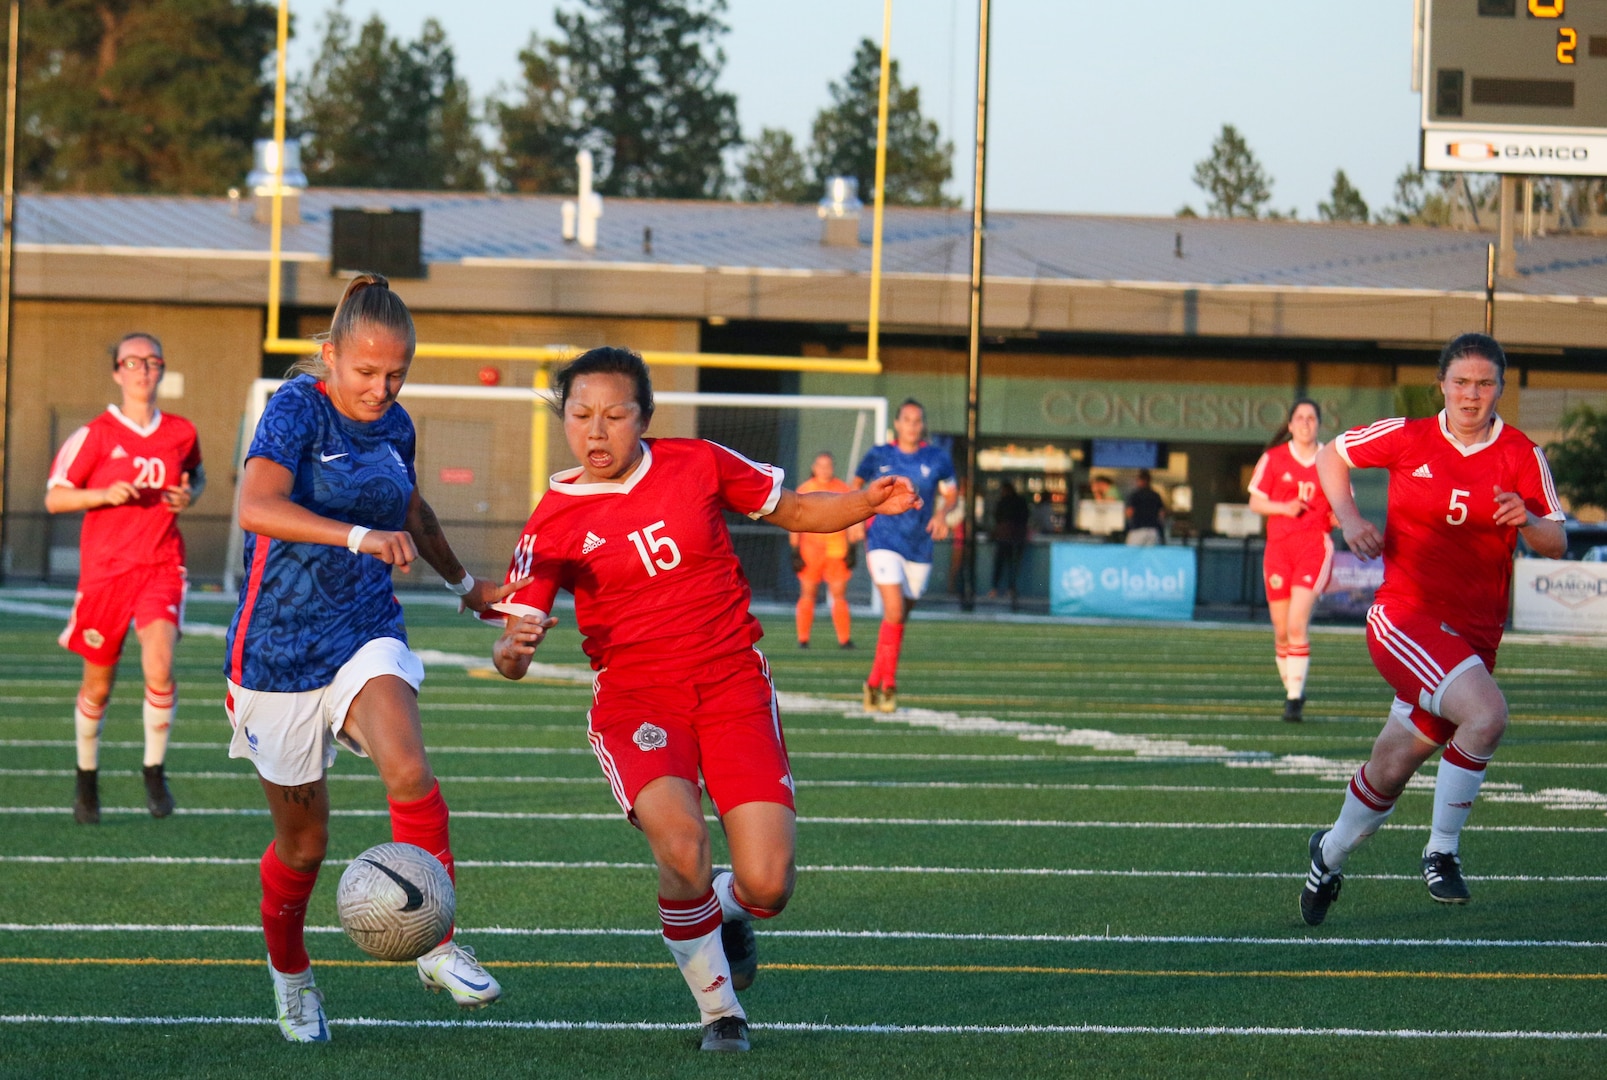 Canada's Katherine Fung defends against France's Fany Proniez in match 16 of the 13th Conseil International du Sport Militaire (CISM) World Women's Military Football Championship hosted by Fairchild Air Force Base in Spokane, Washingon.  This year's championship features teams from the United States, Belgium, Cameroon, Canada, France, Germany, Ireland, Mali, Netherlands, and South Korea.  (Department of Defense Photo by Mr. Steven Dinote, released).